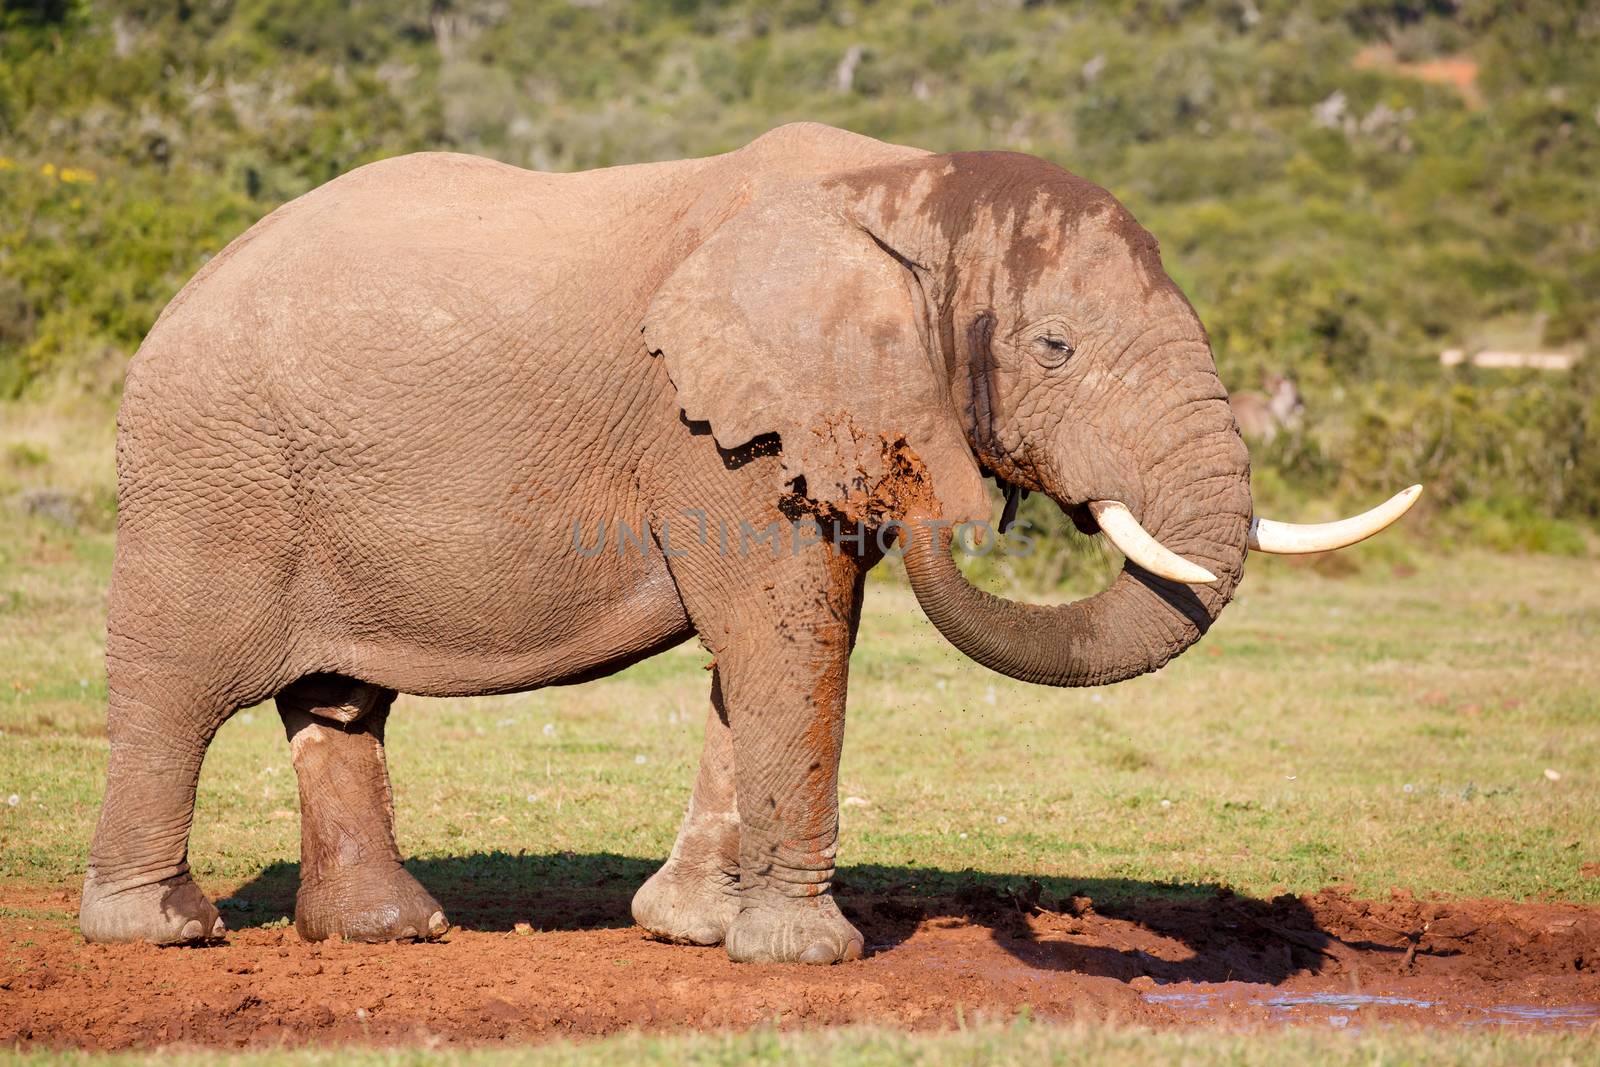 Large male African elephant spraying muddy water onto itself to cool down